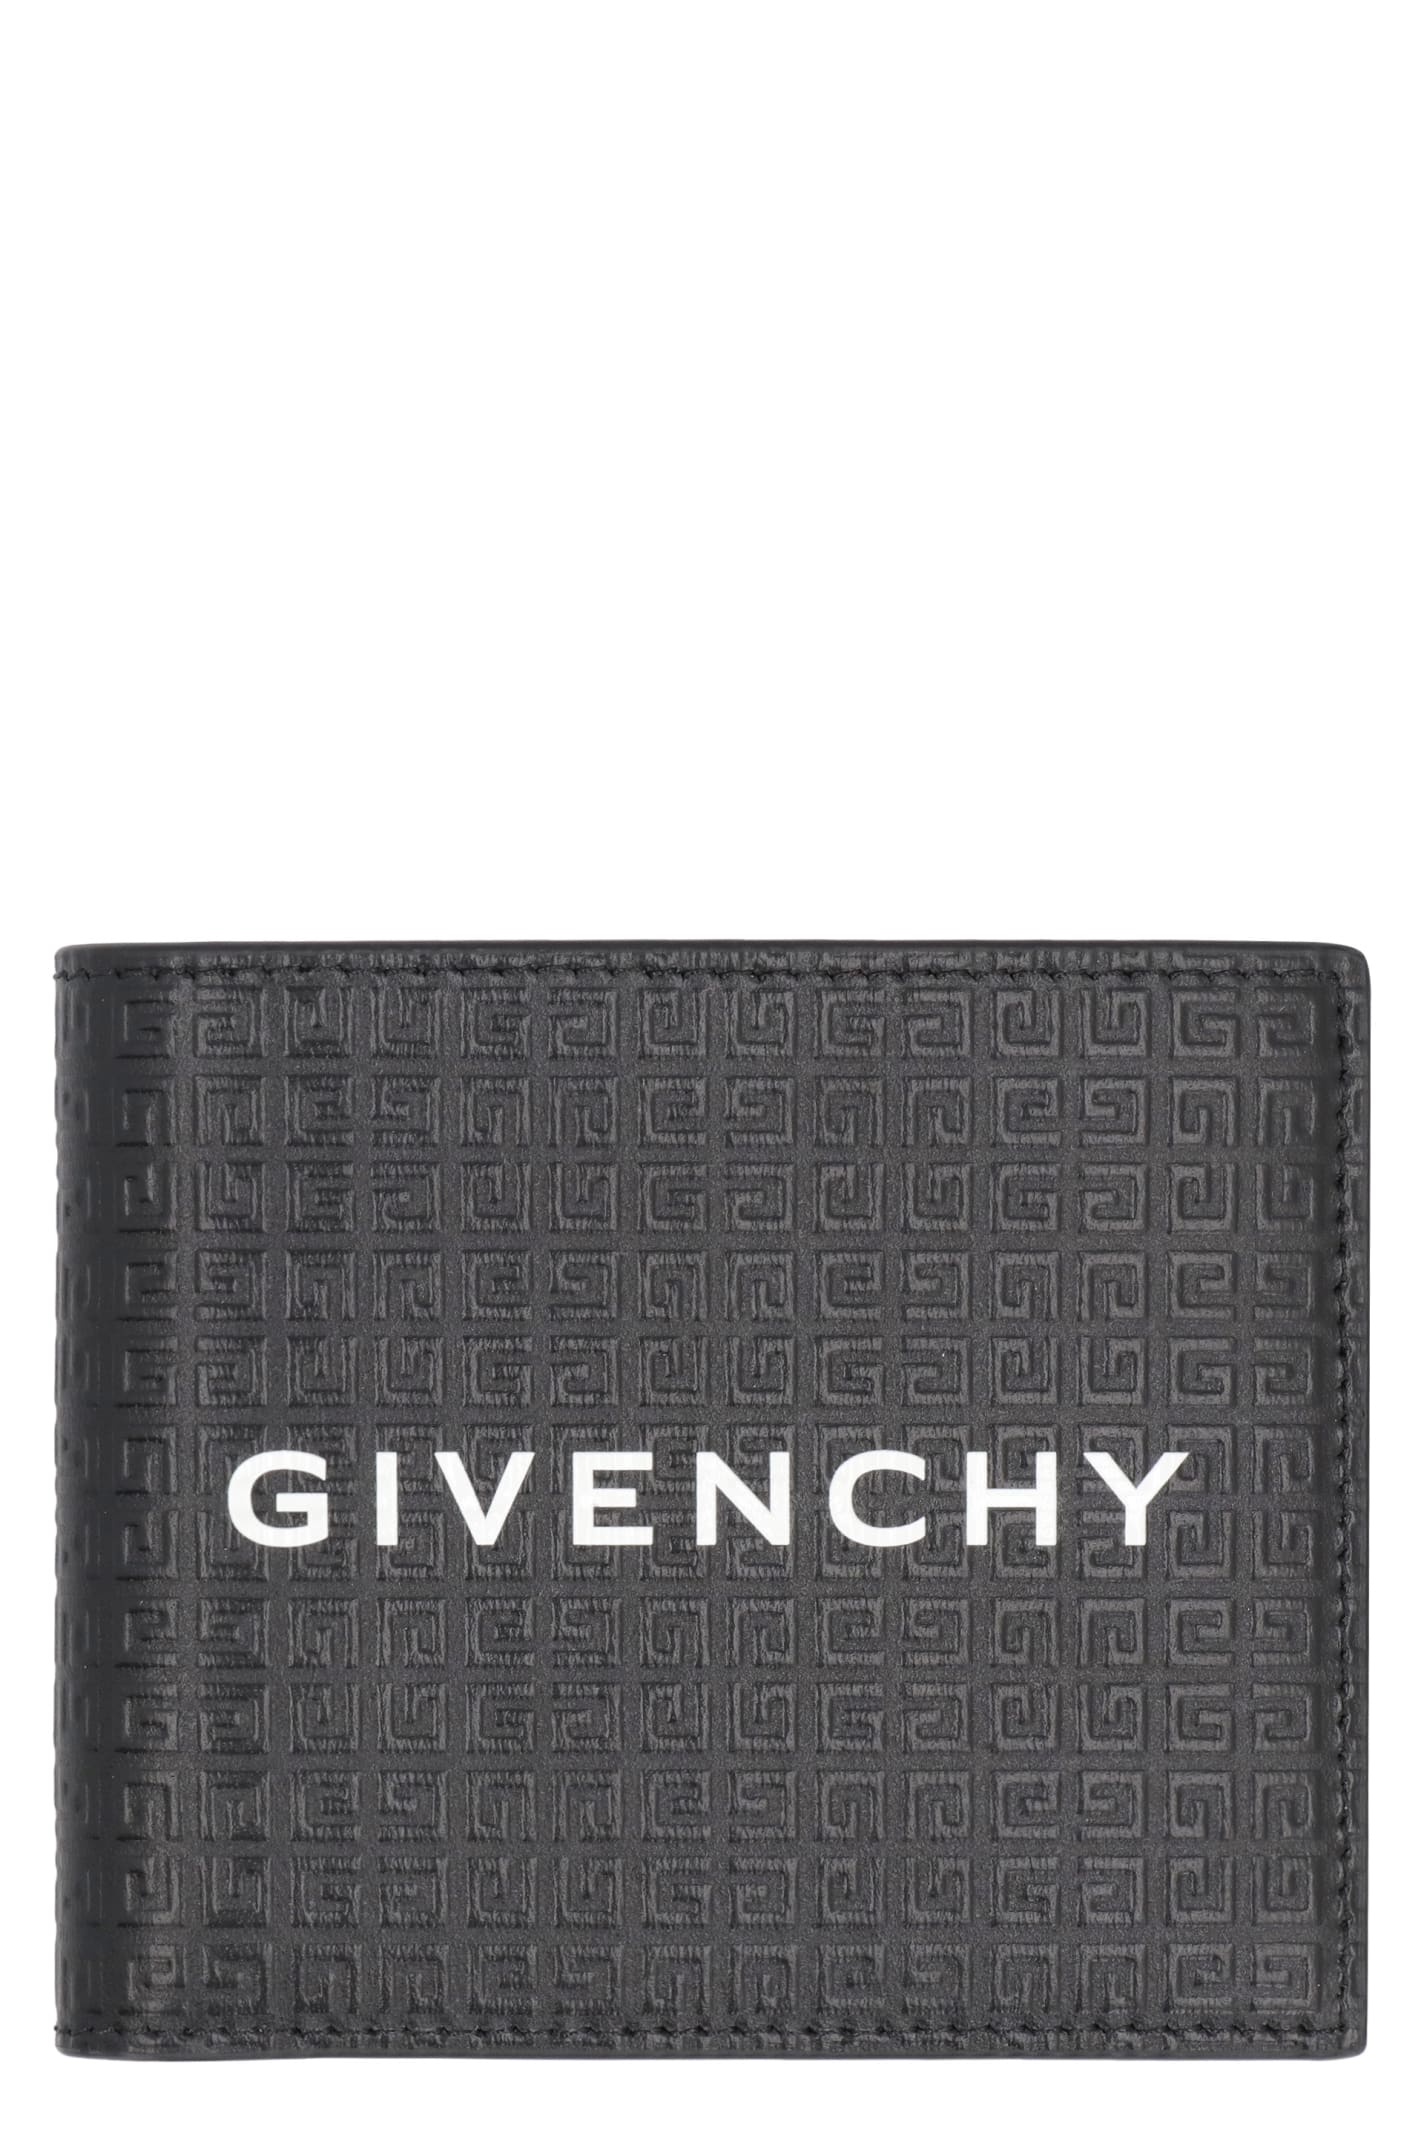 GIVENCHY LOGO LEATHER WALLET